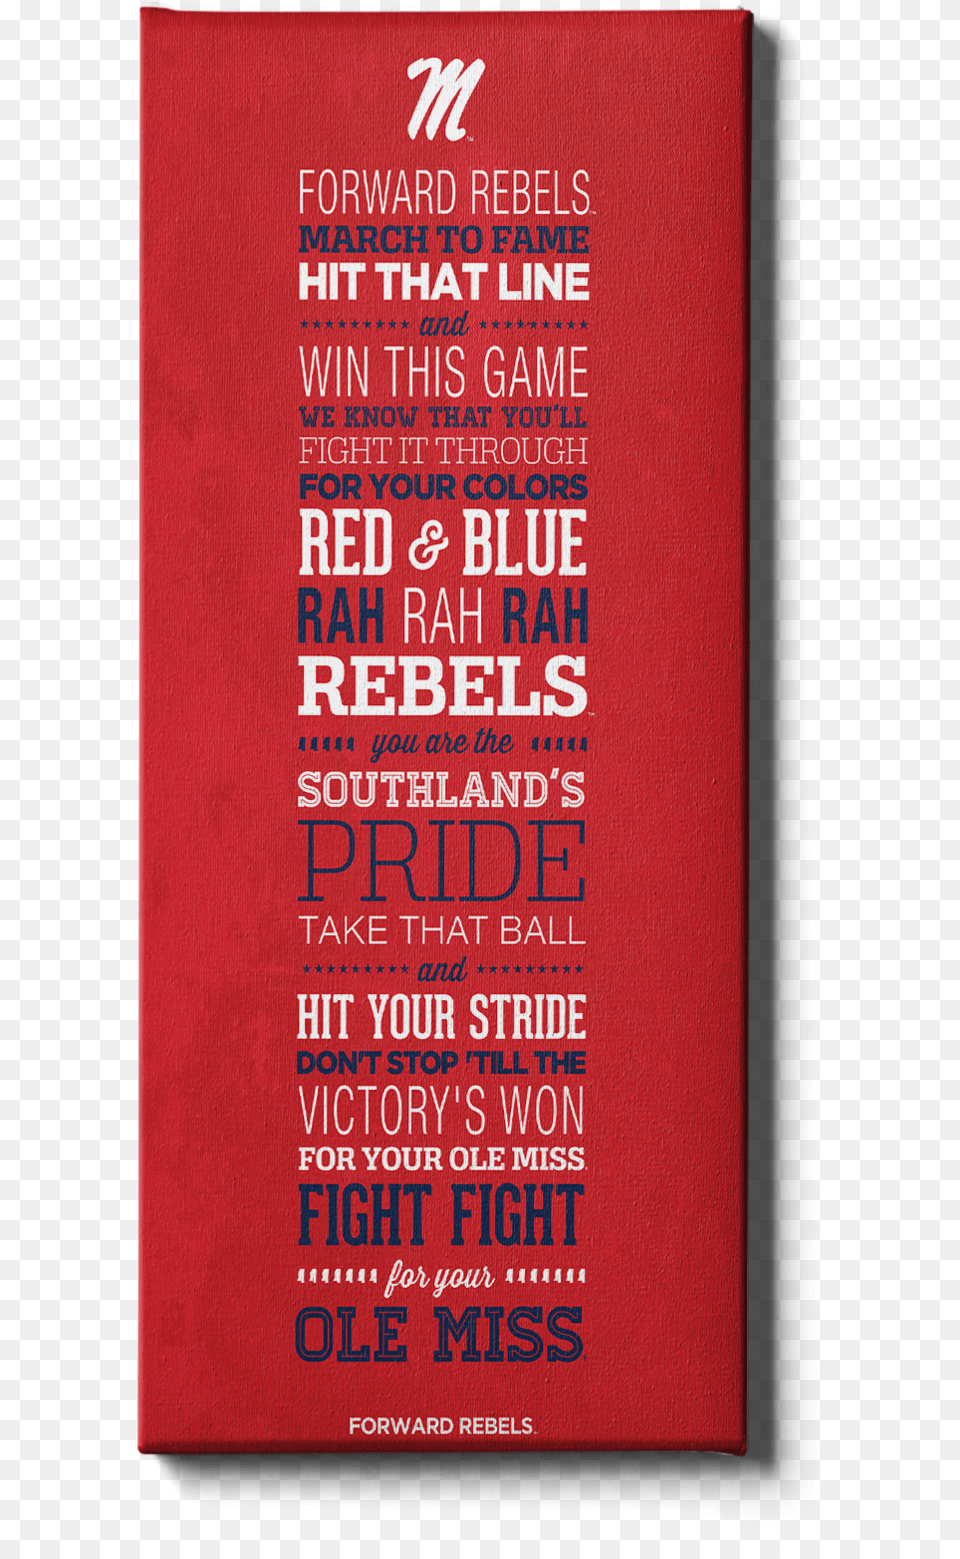 Ole Miss Rebels Book Cover, Advertisement, Poster, Publication Png